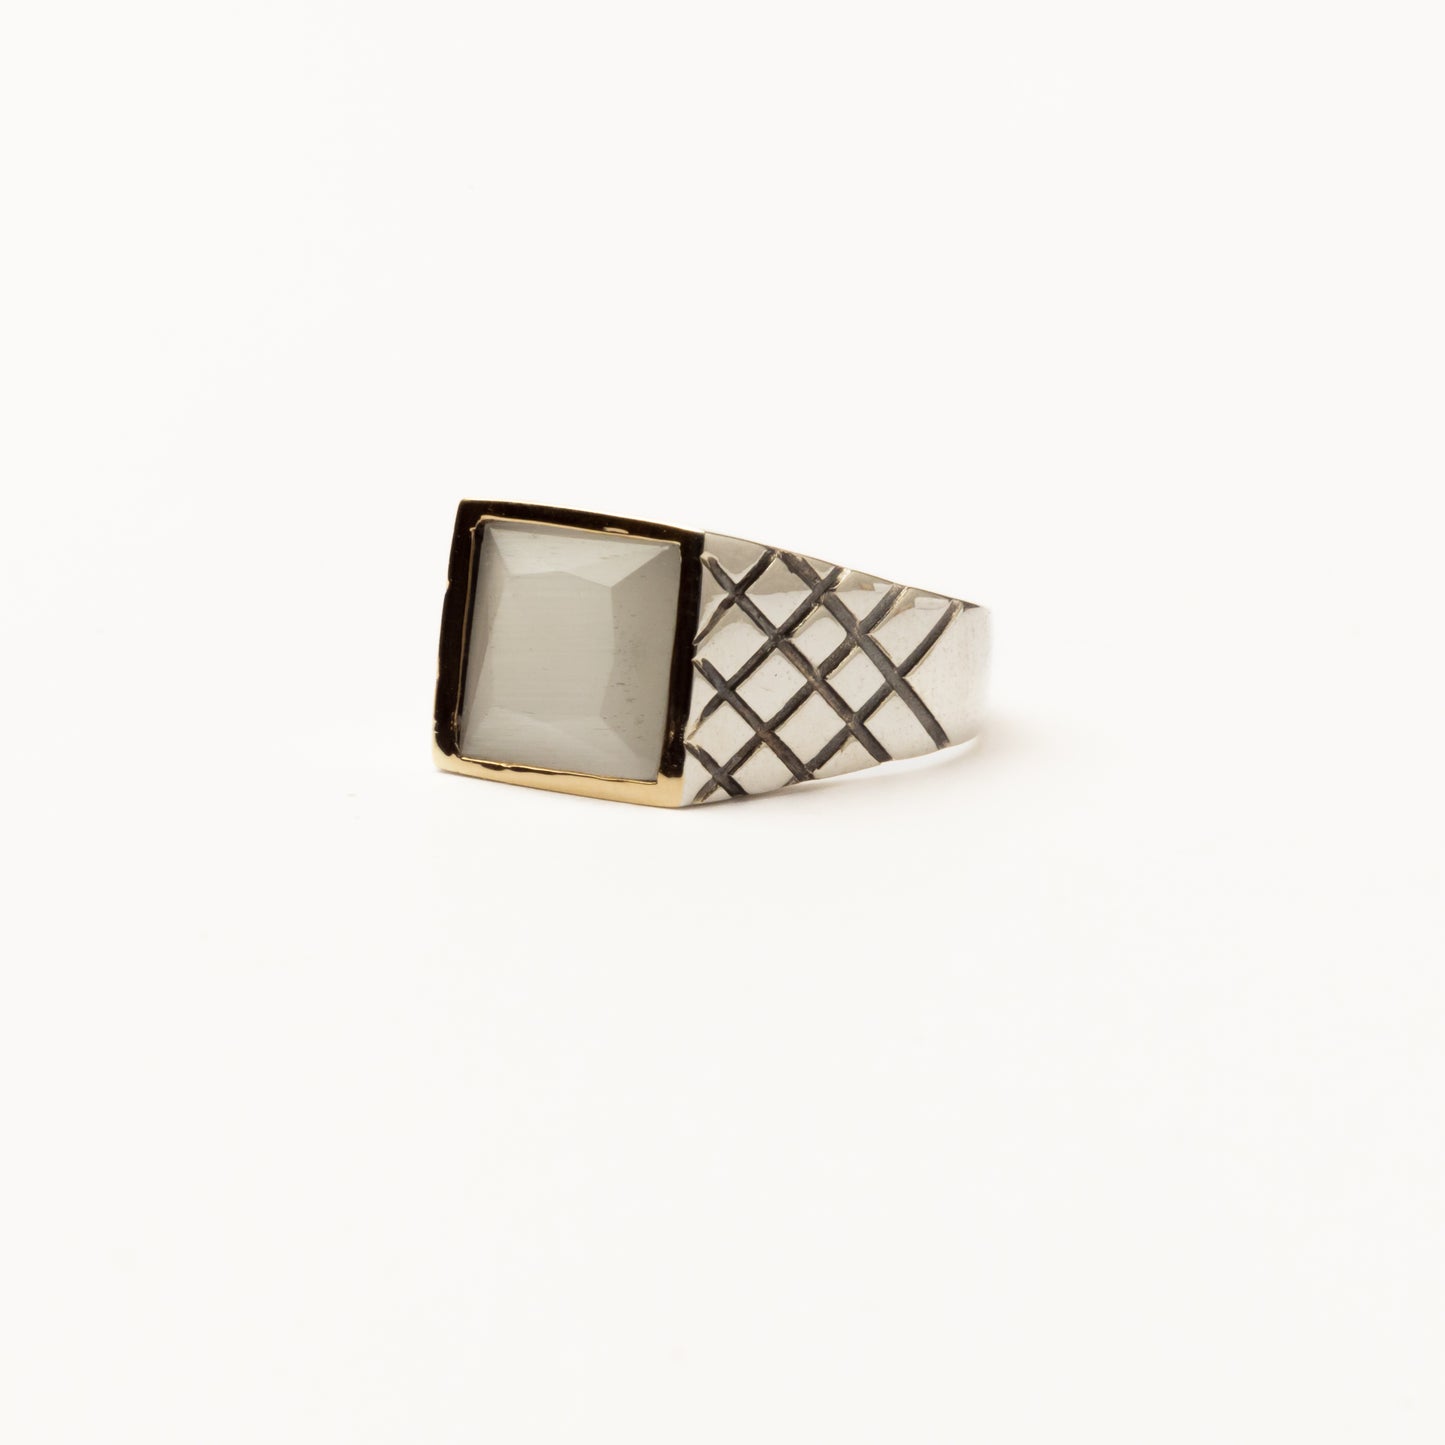 Silver and gold square stone ring